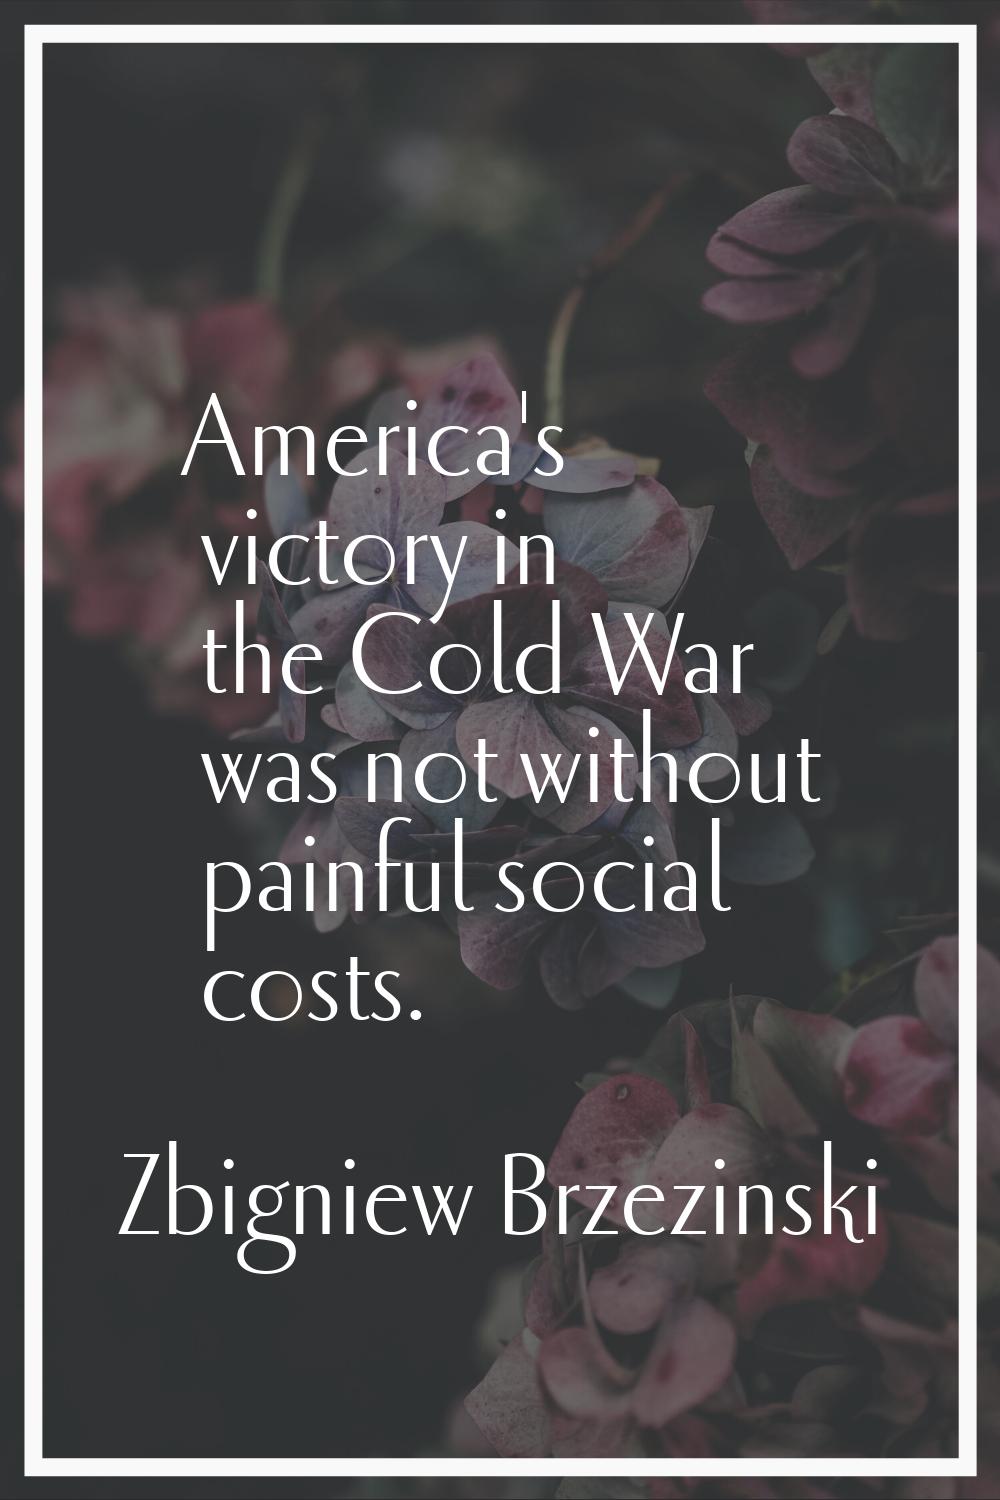 America's victory in the Cold War was not without painful social costs.